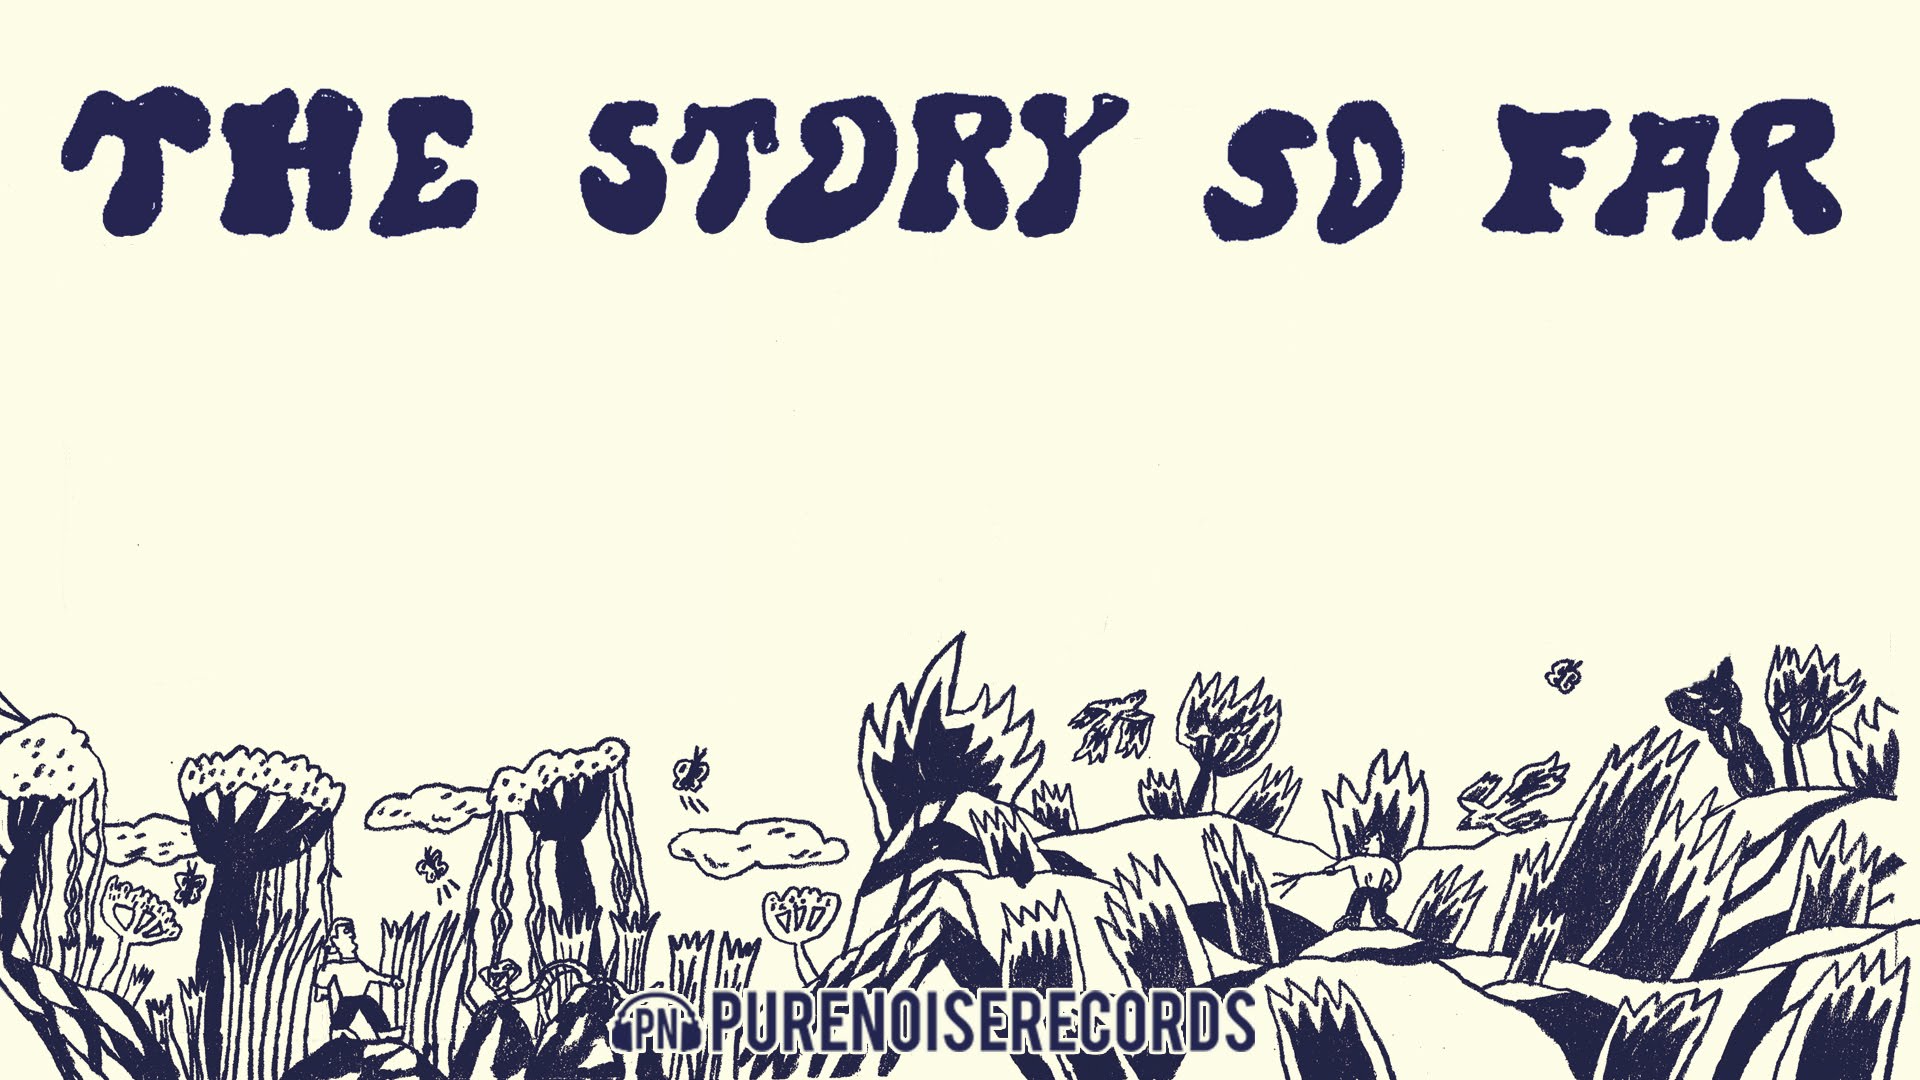 Song of the Day The Story So Far Nerve The Telltale Mind